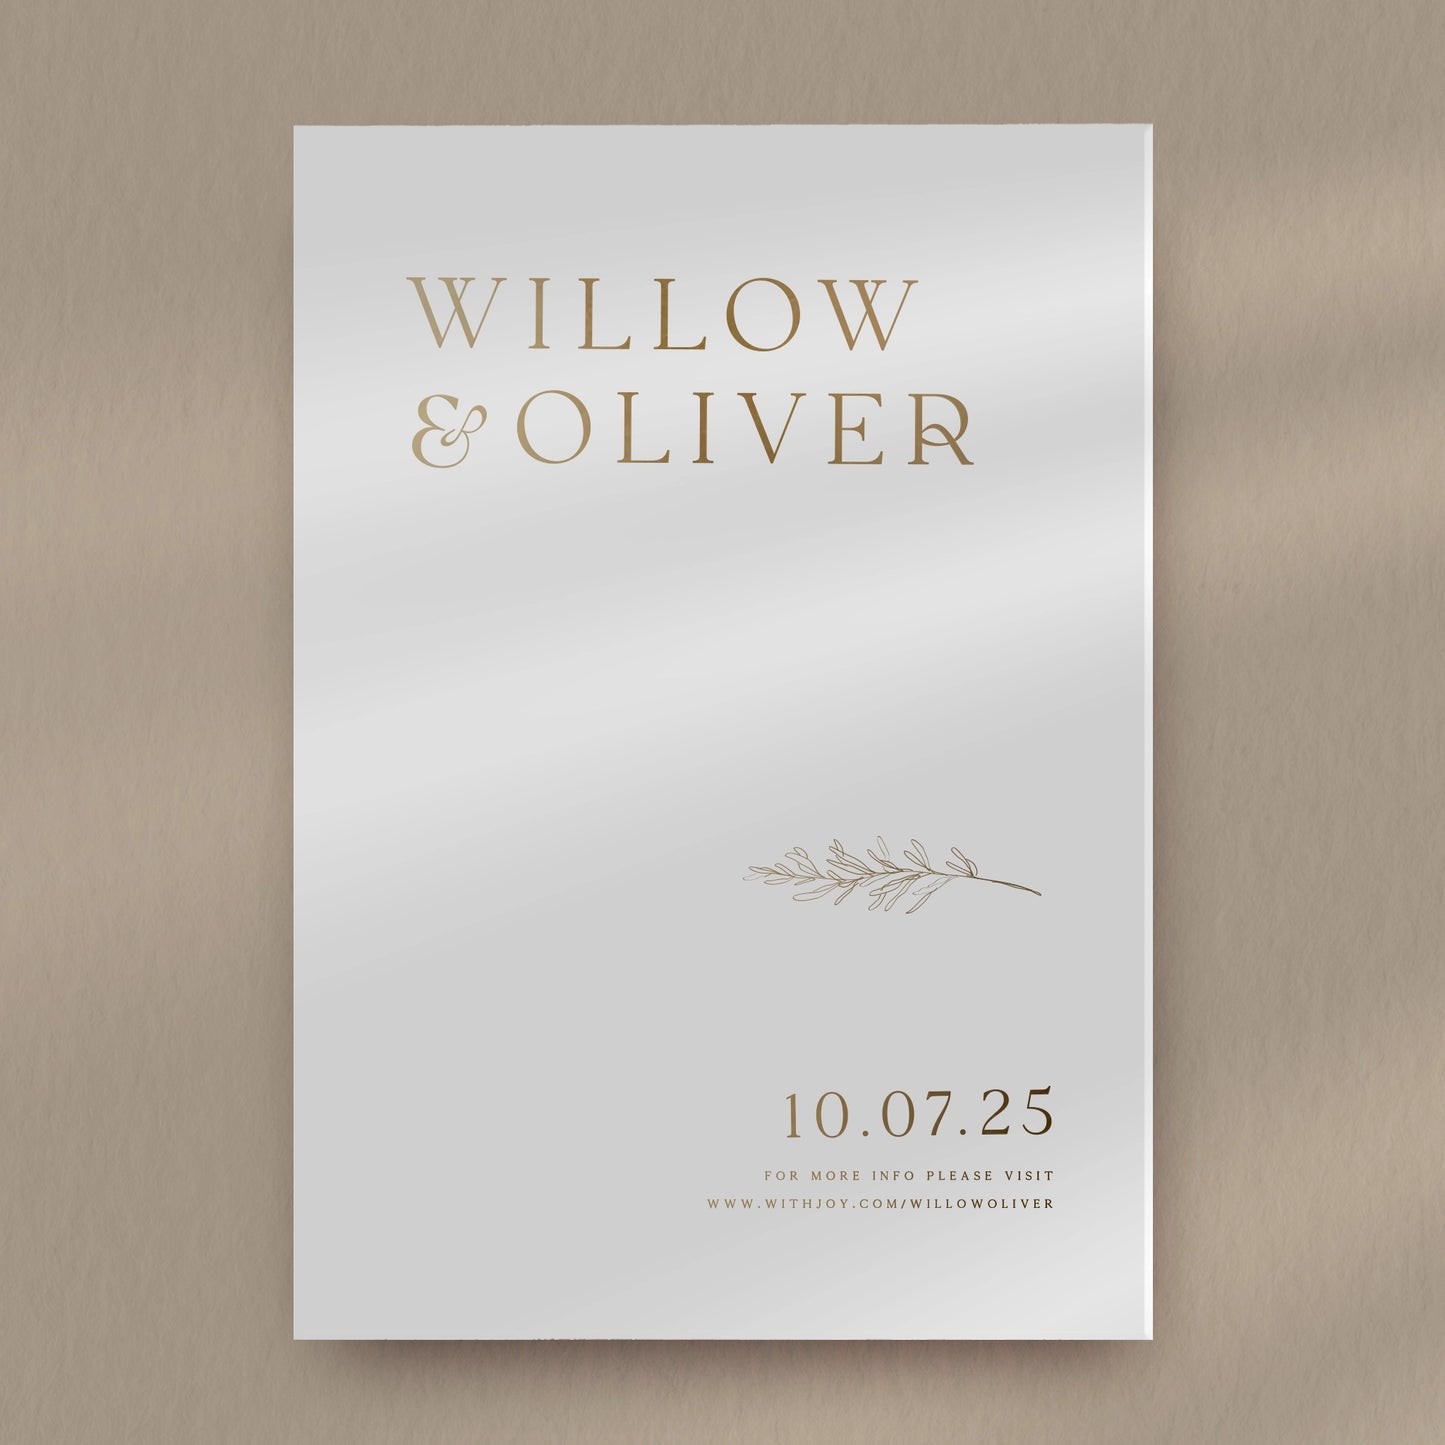 Day Invitation Sample  Ivy and Gold Wedding Stationery Willow  